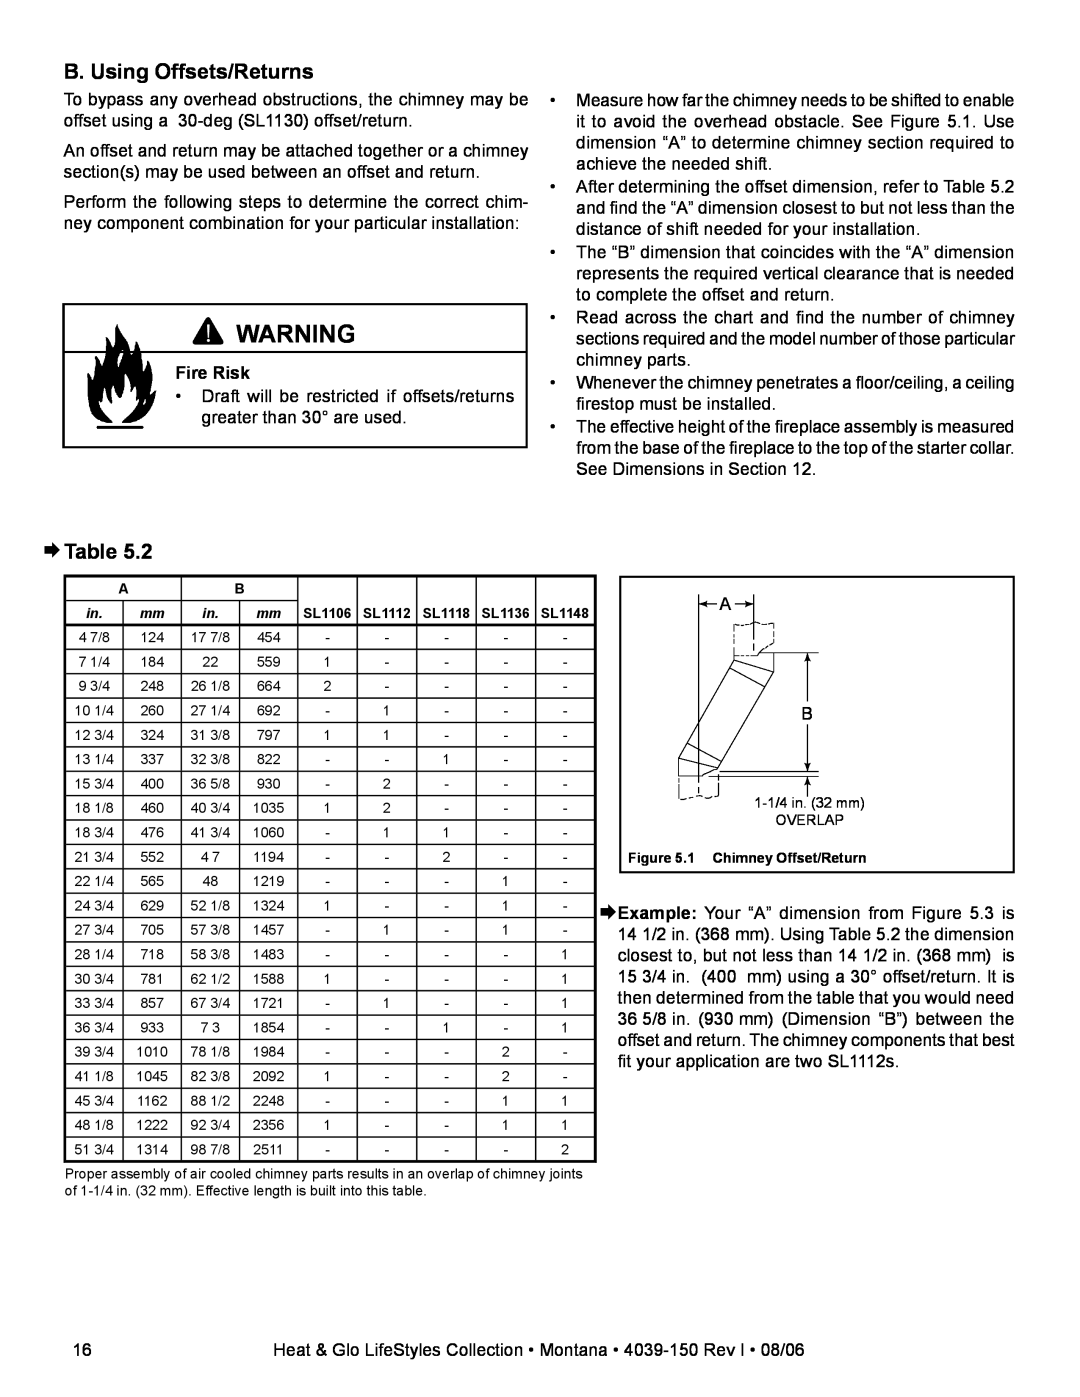 Heat & Glo LifeStyle Montana-42, Montana-36 owner manual B. Using Offsets/Returns, ¨Table, Fire Risk 